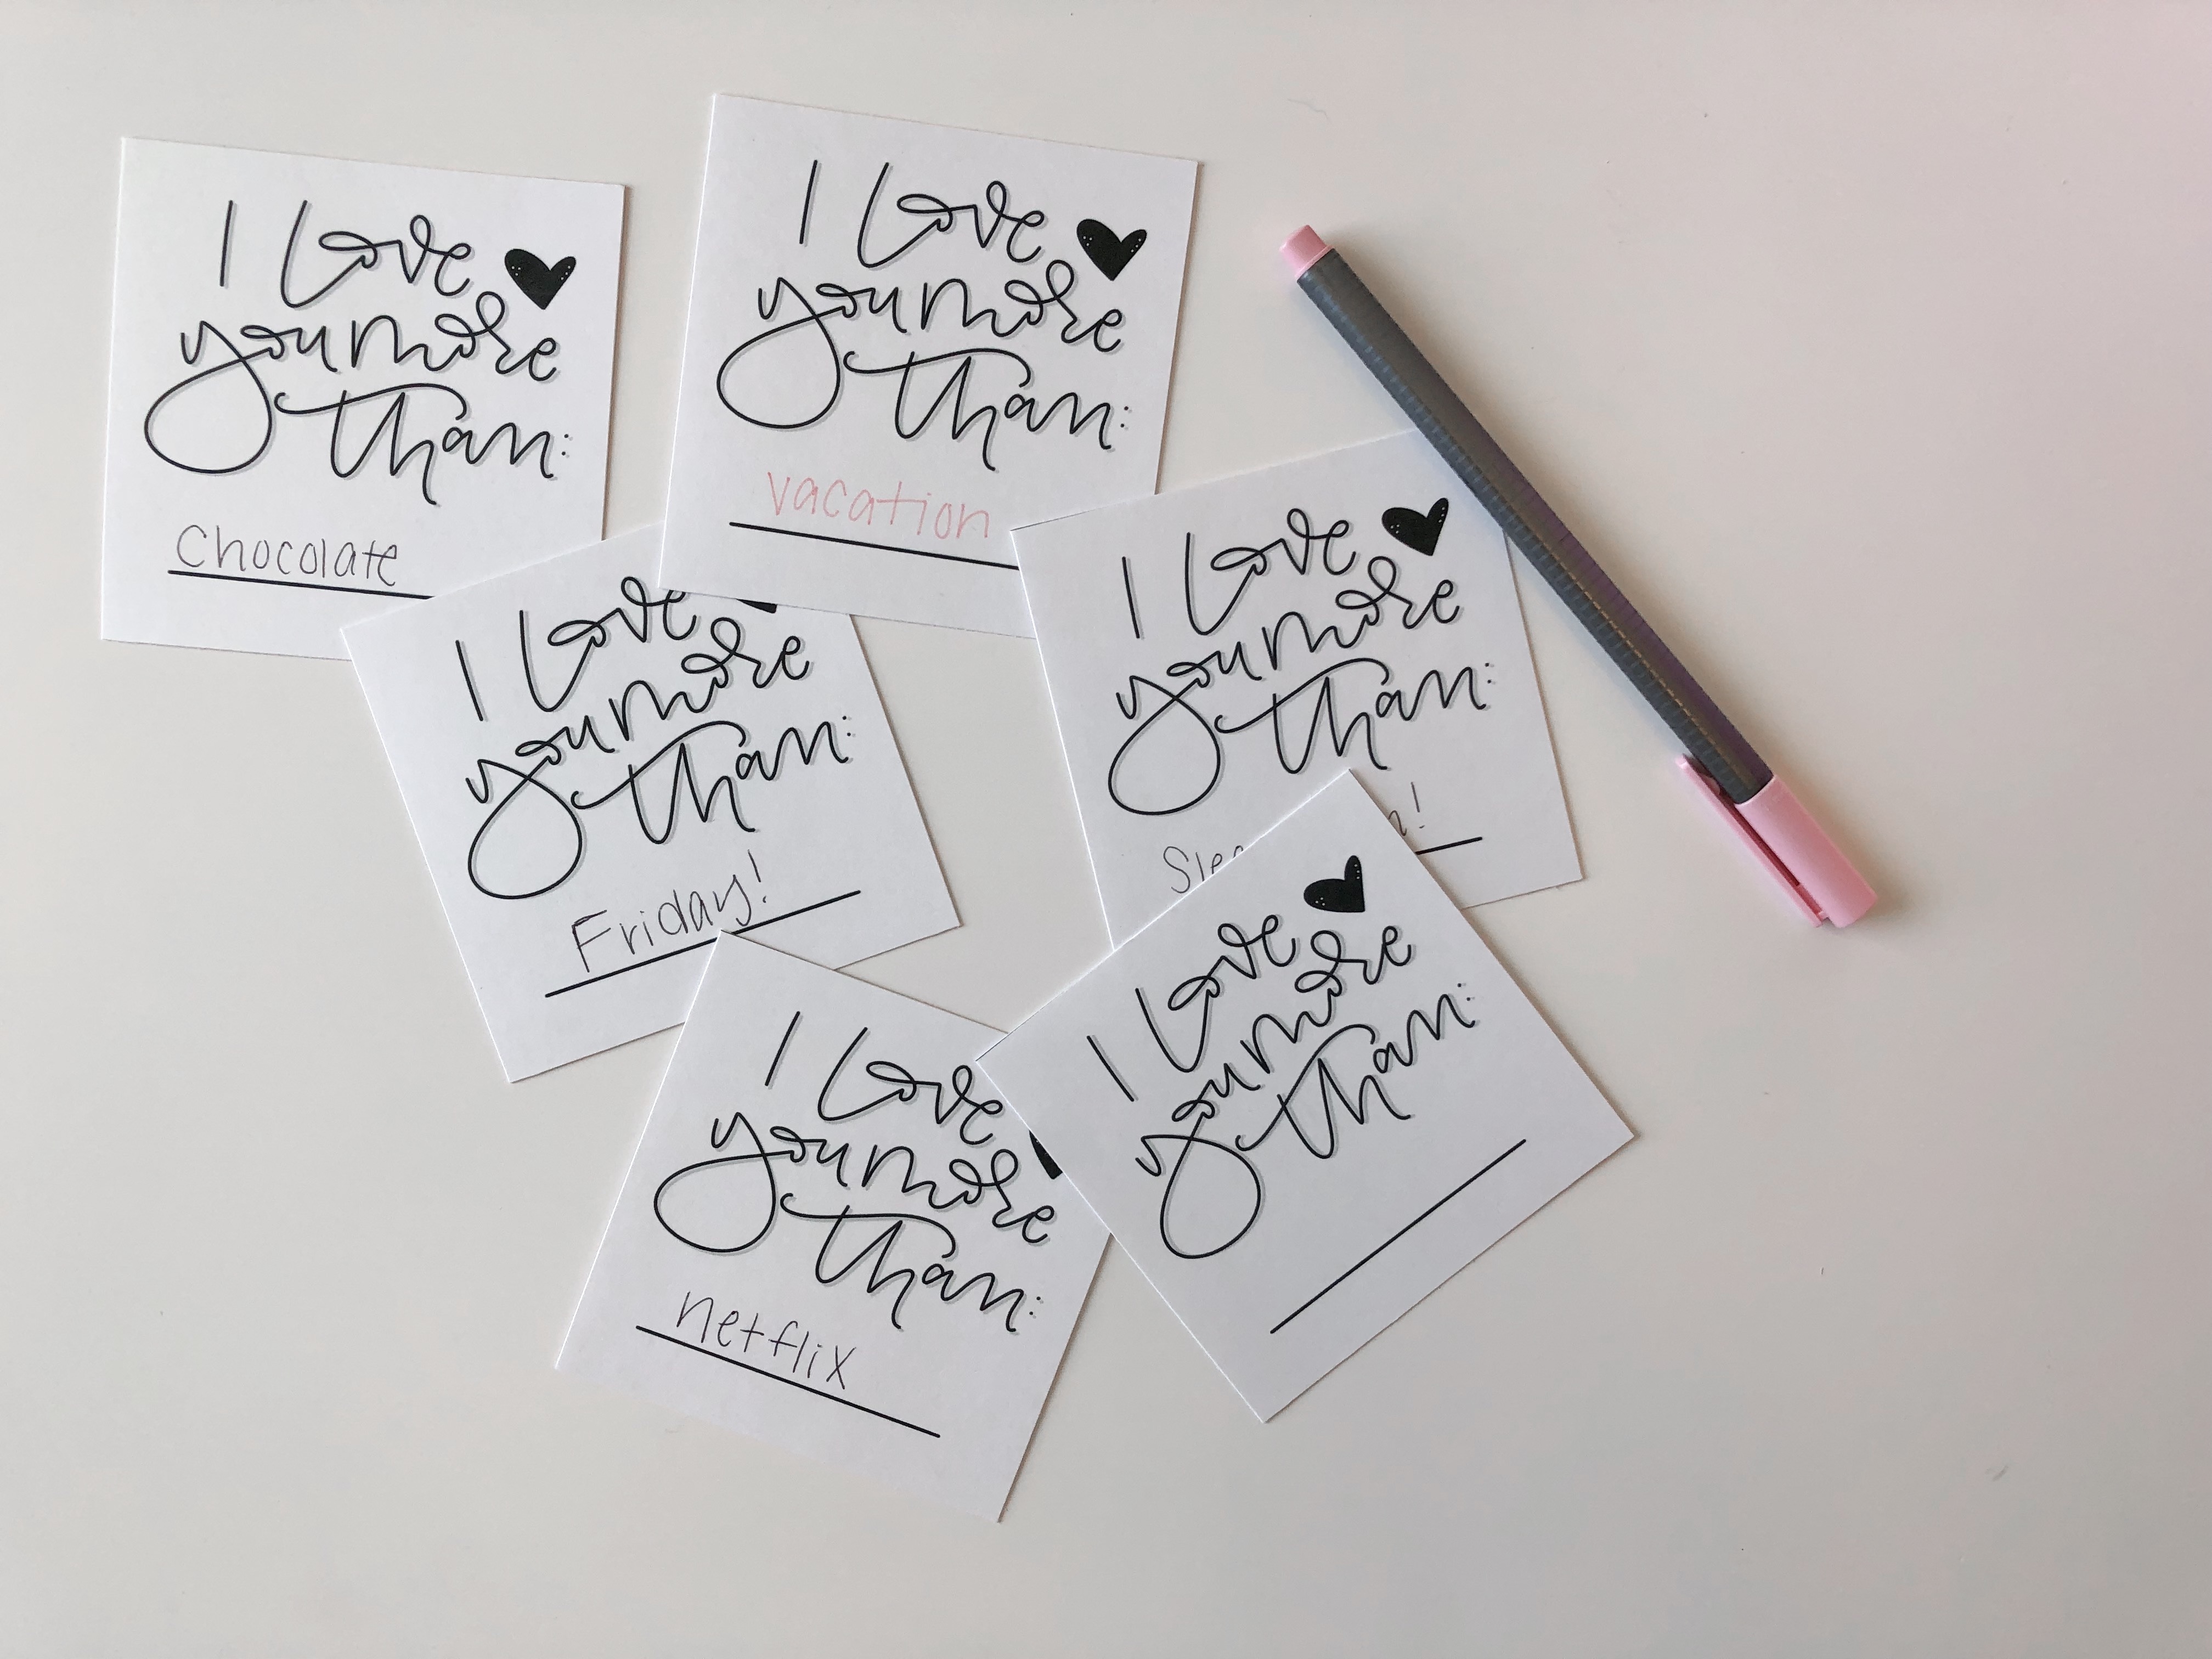 A set of 6 customizable love notes on a white desk